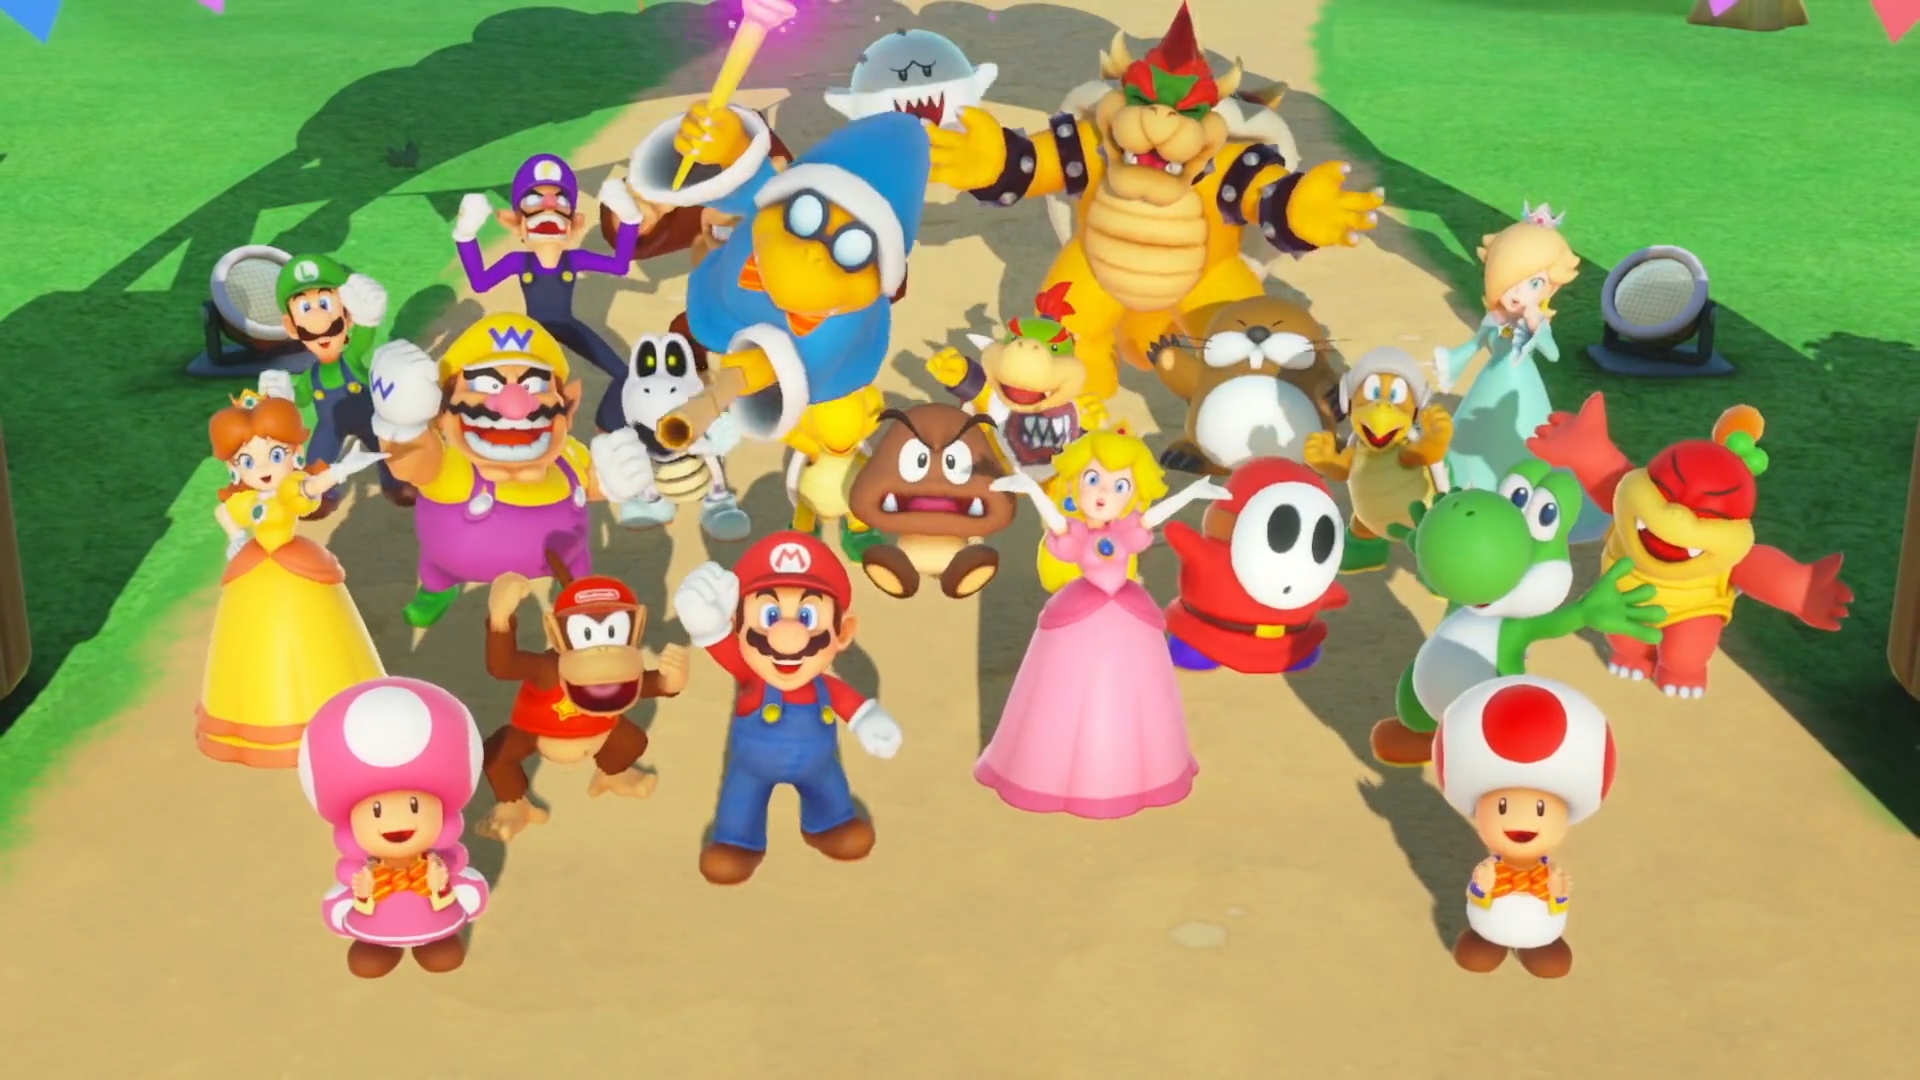 How to unlock characters, new modes, boards, and more in Super Mario Party | Digital Trends